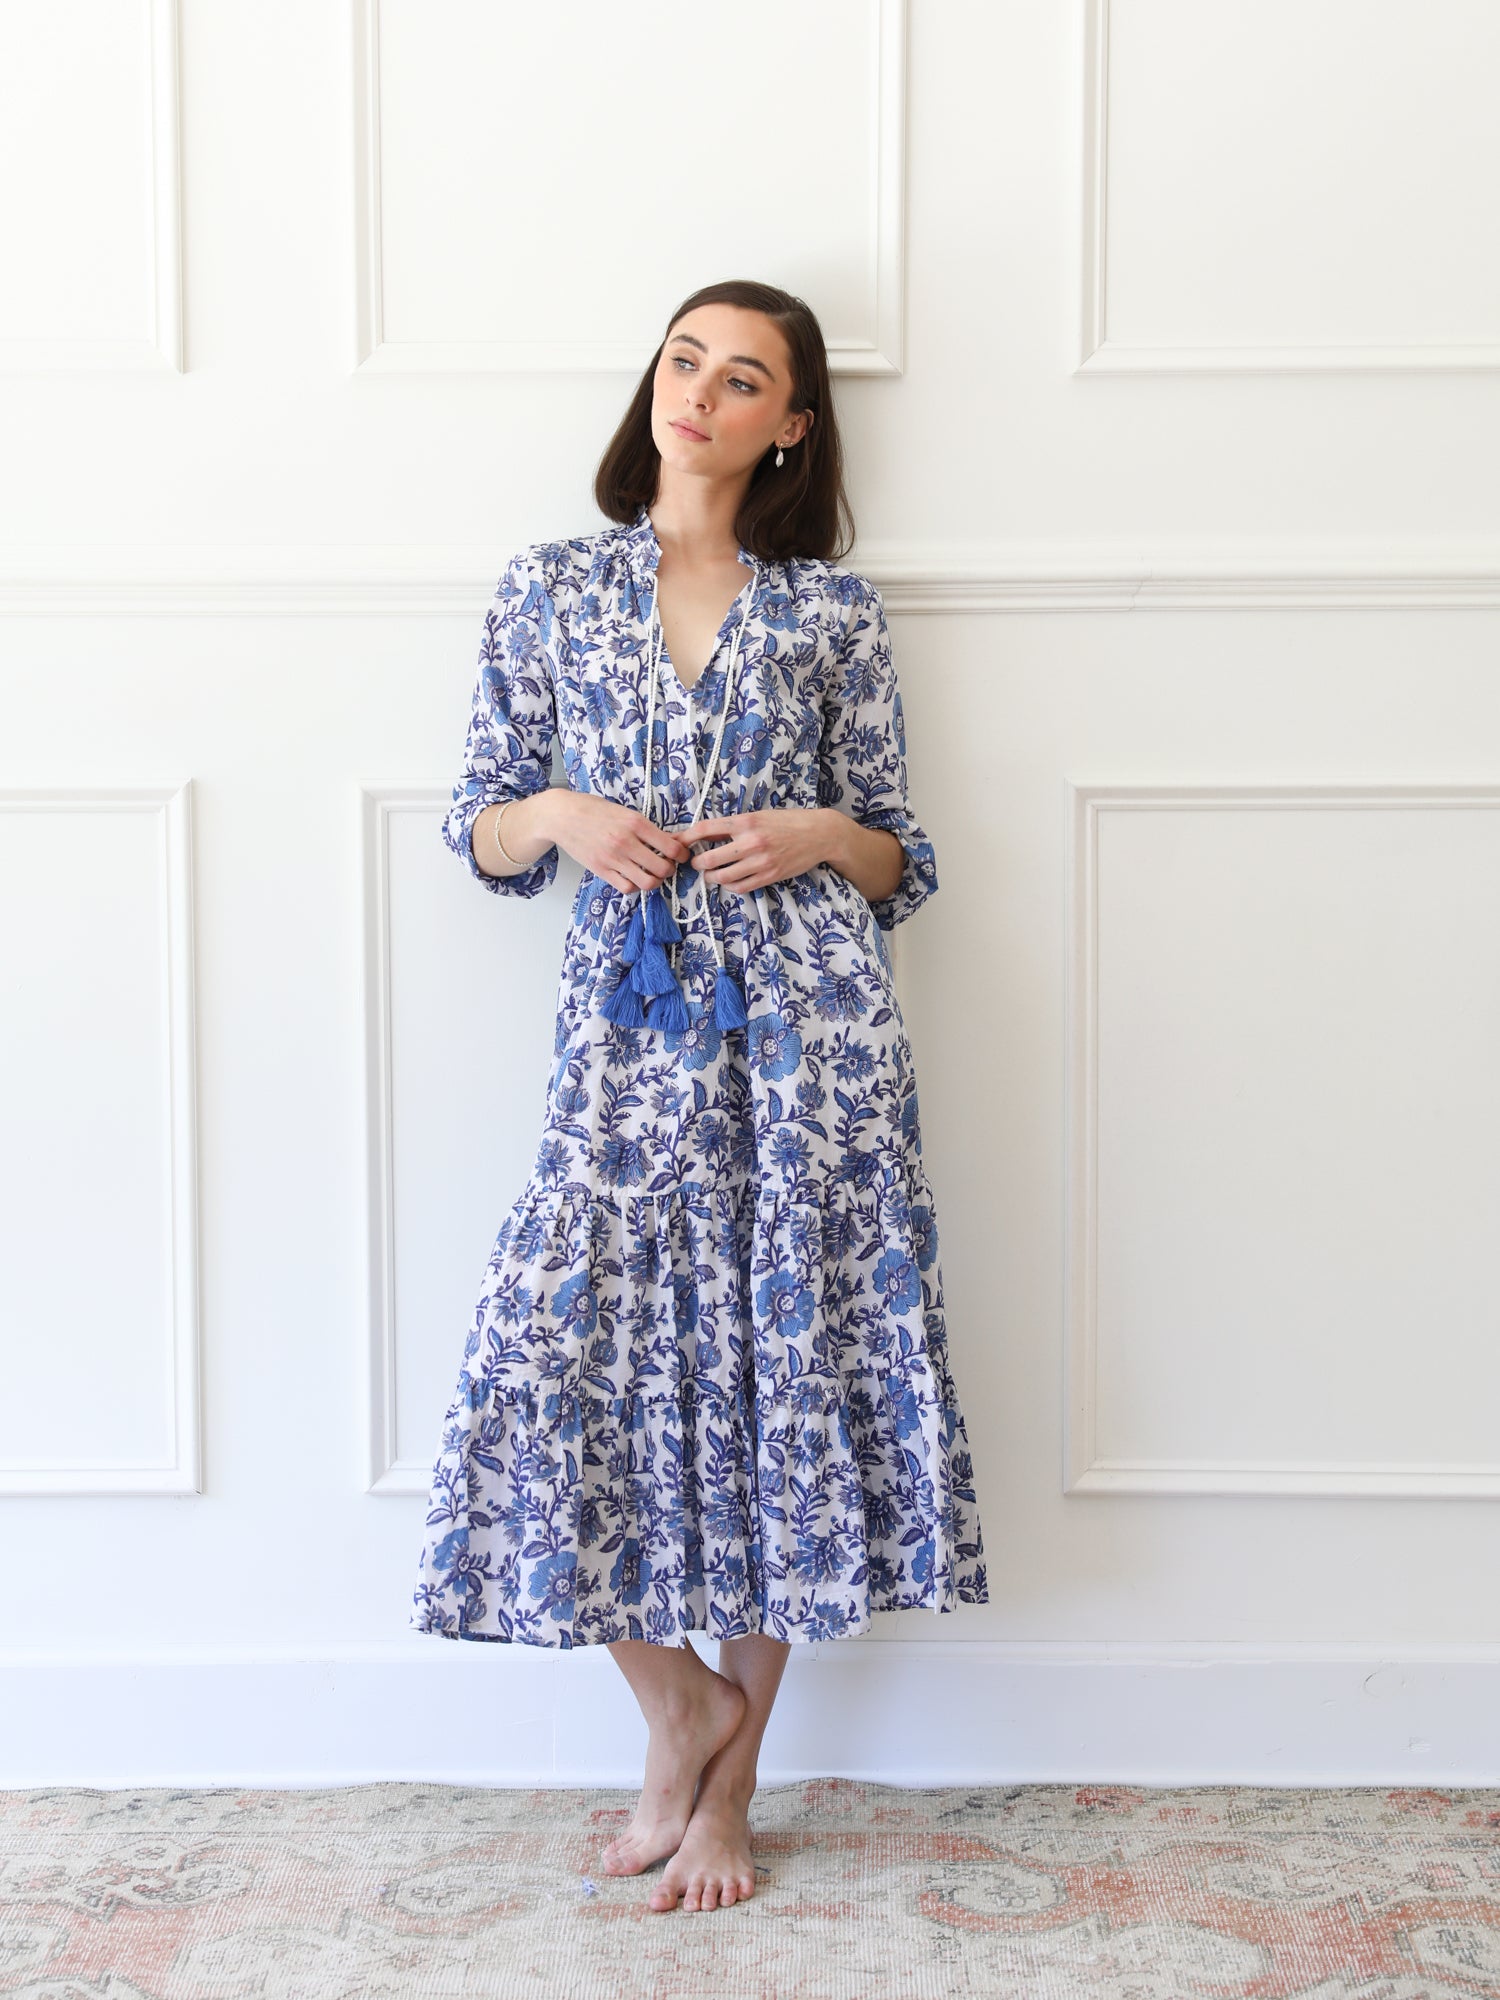 MILLE Clothing Astrid Dress in Blue Floral